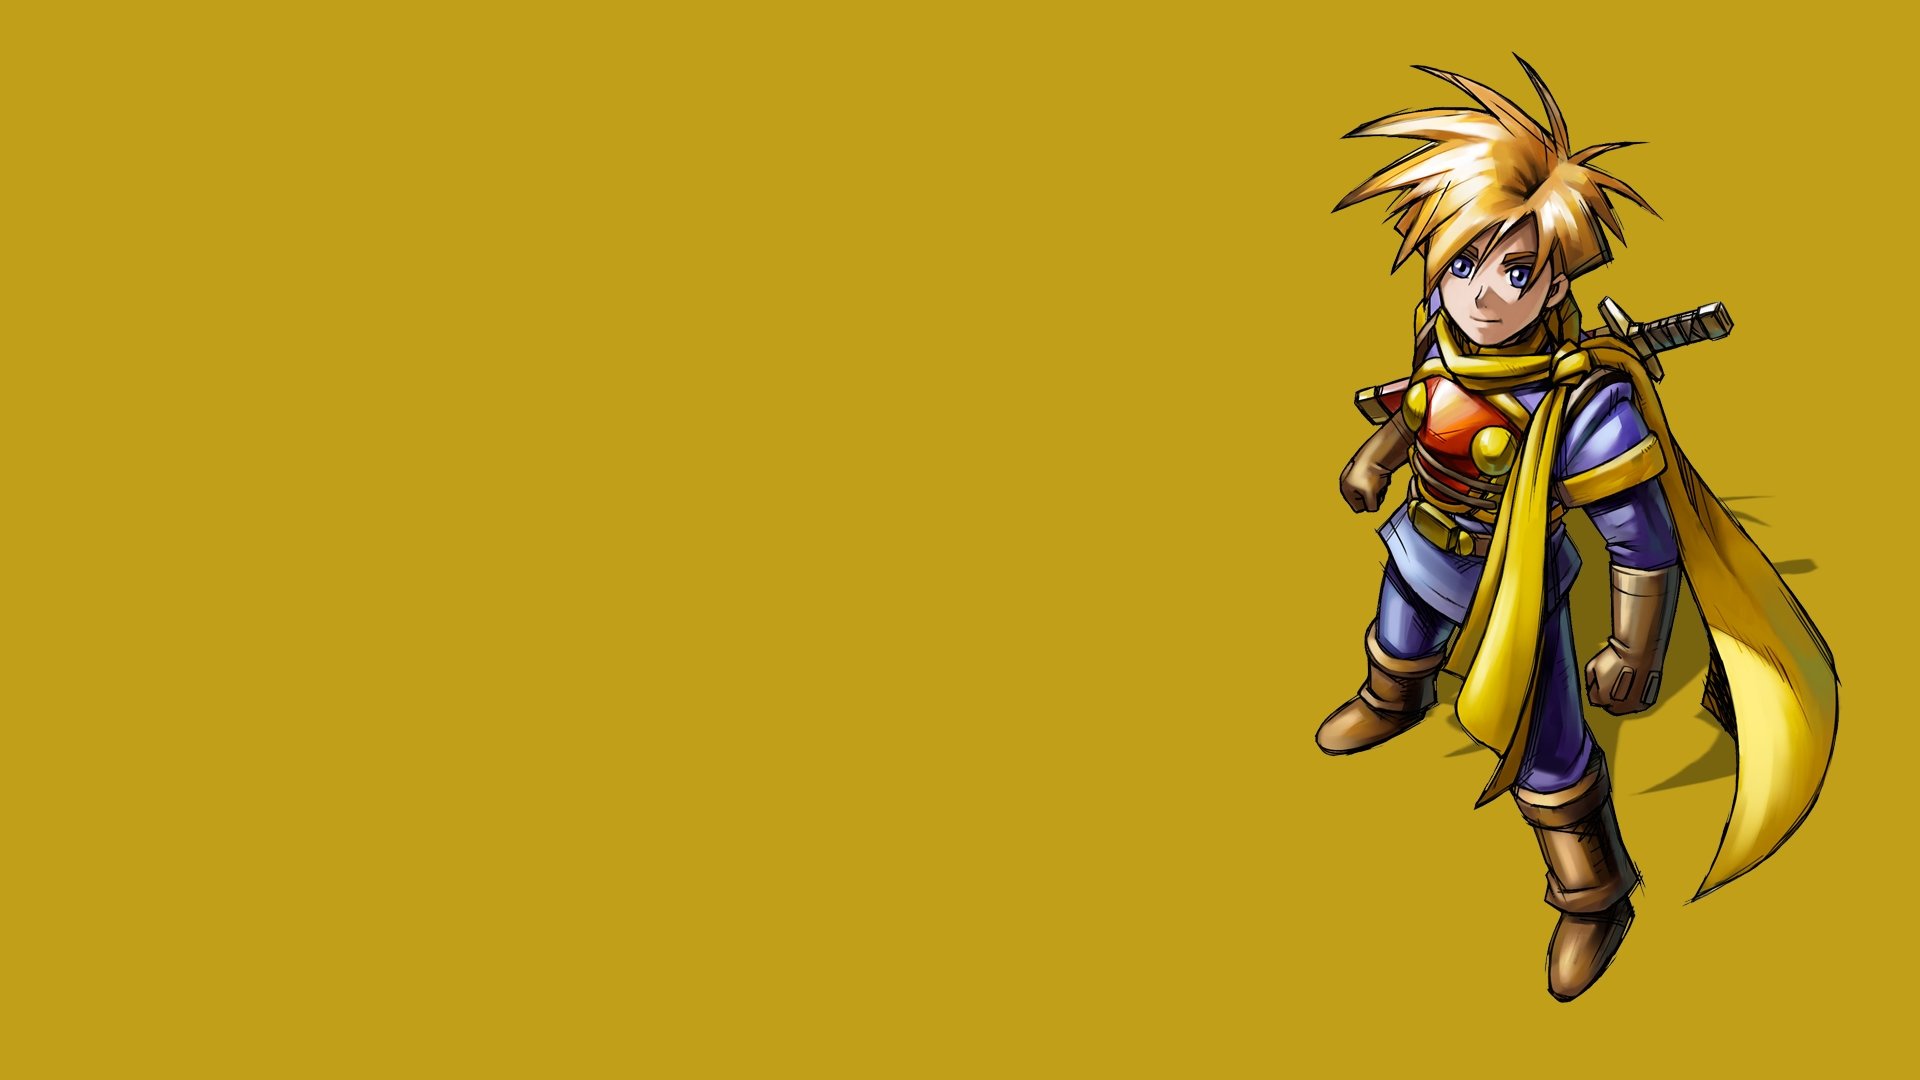 Free Golden Sun high quality wallpaper ID:89372 for hd 1080p computer